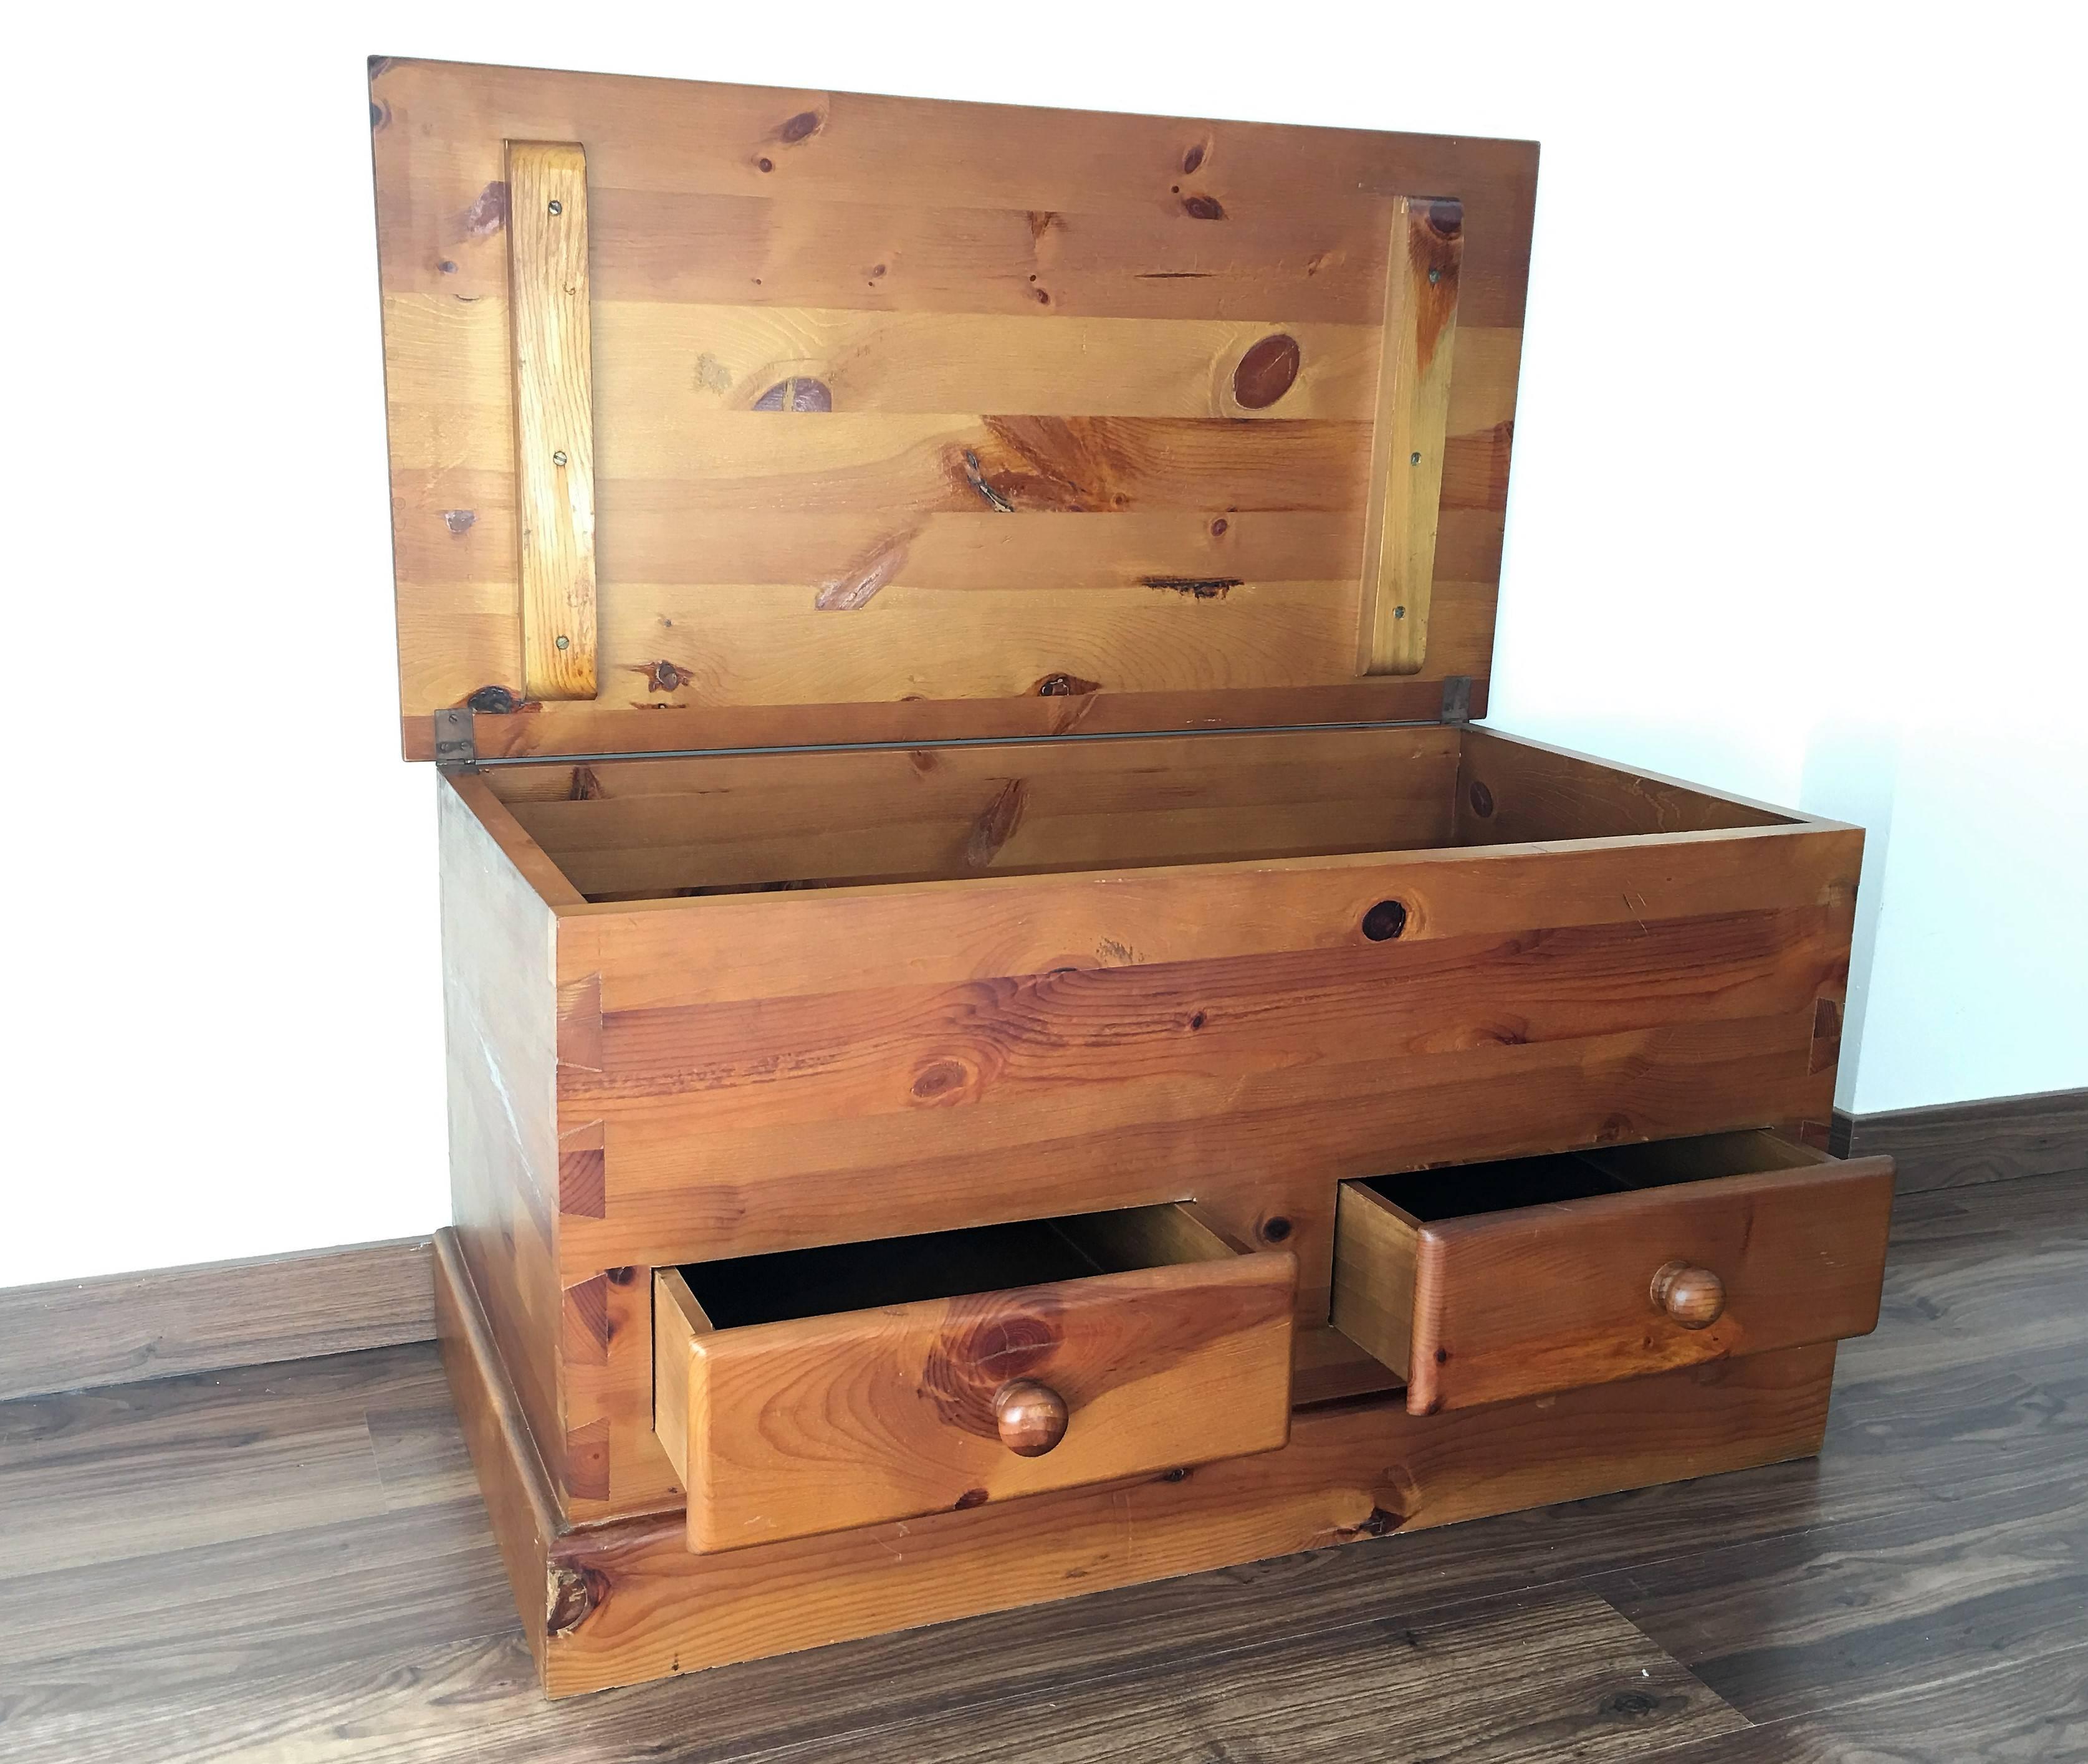 20th century chest on bracket feet with a top that opens to reveal storage and drawers below.